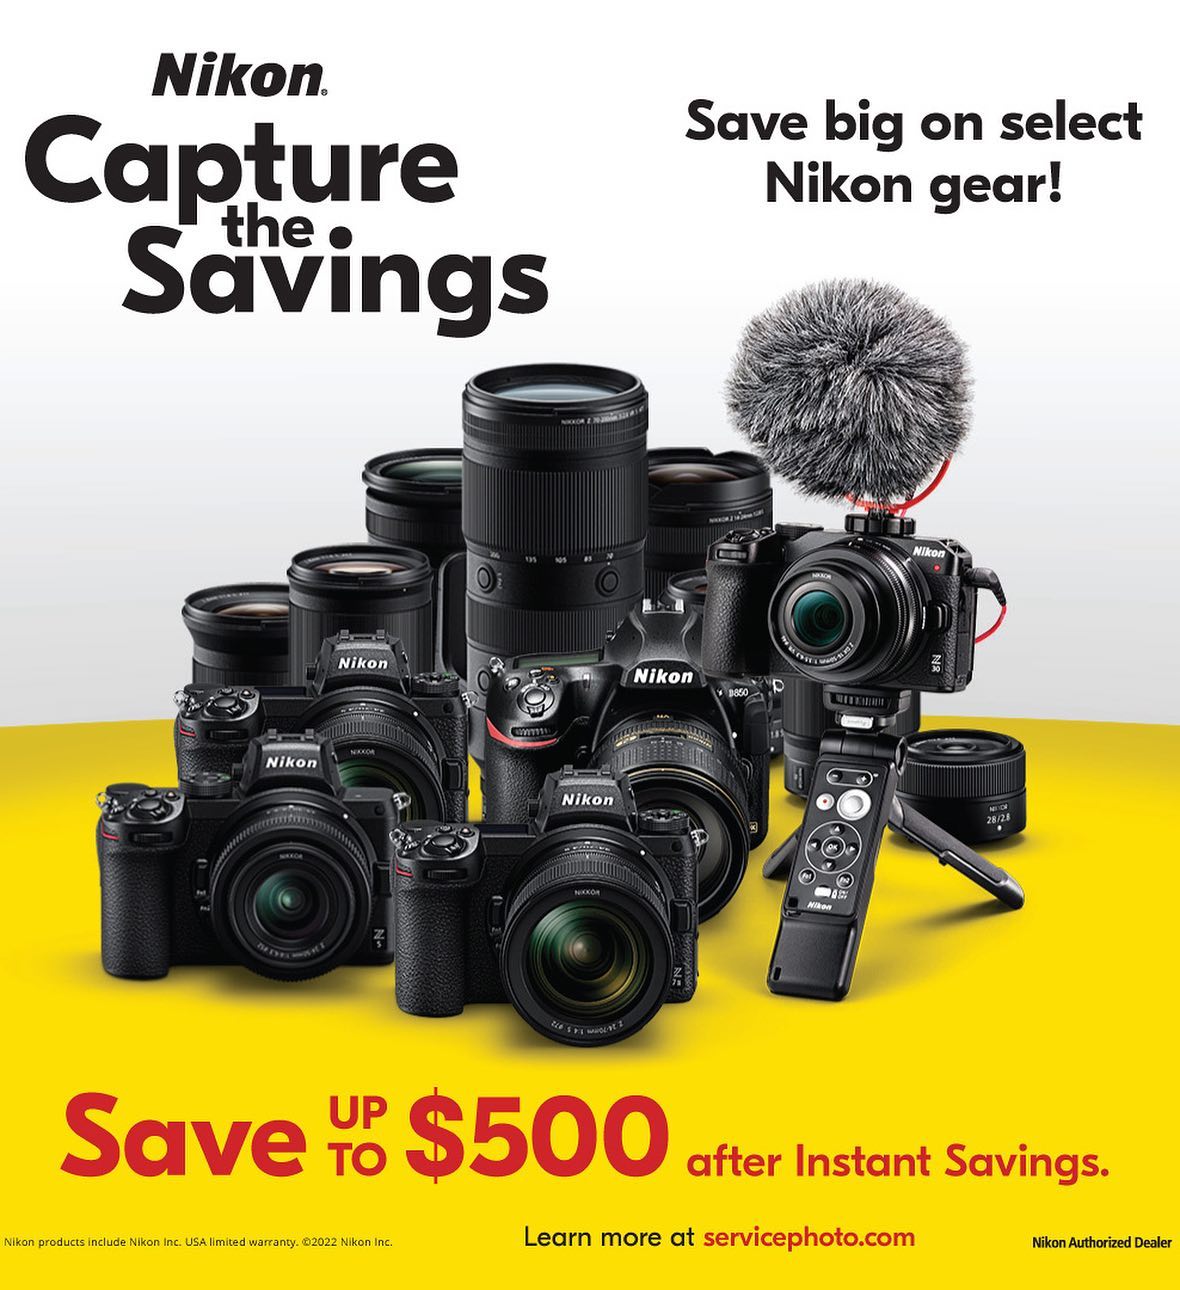 the-latest-nikon-rebates-for-october-over-40-cameras-and-lenses-on